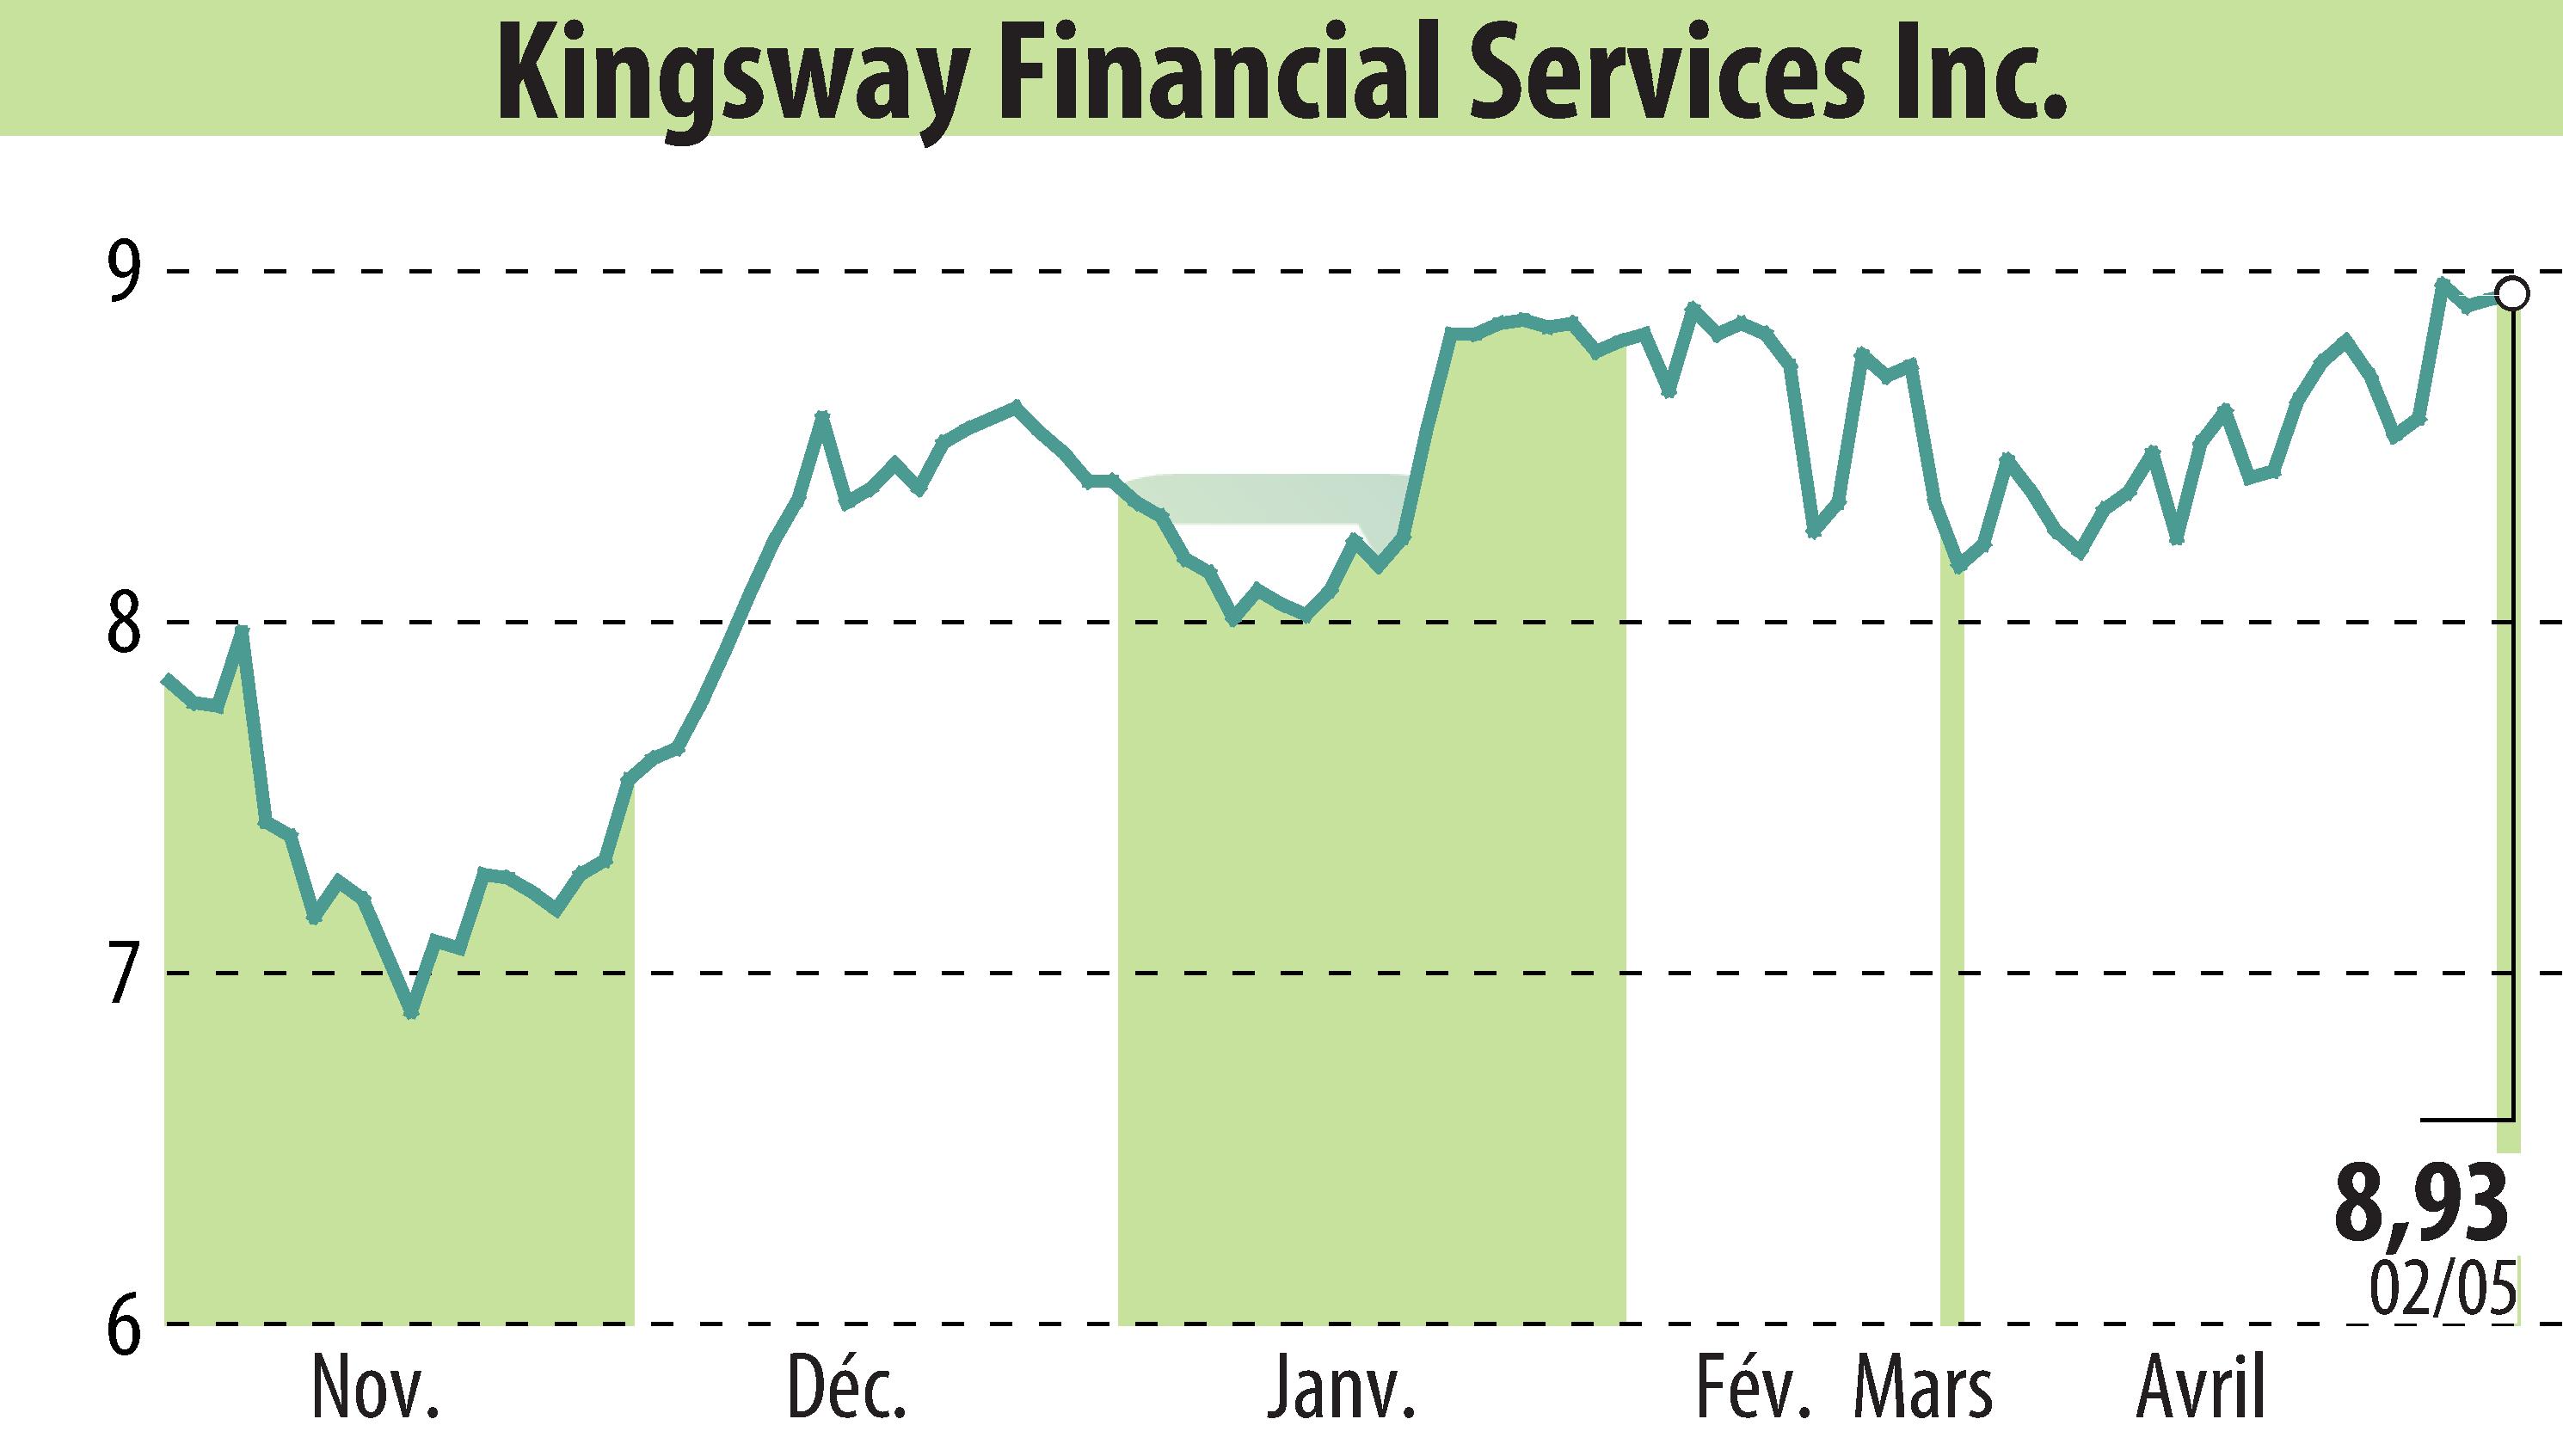 Stock price chart of Kingsway Financial Services, Inc. (EBR:KFS) showing fluctuations.